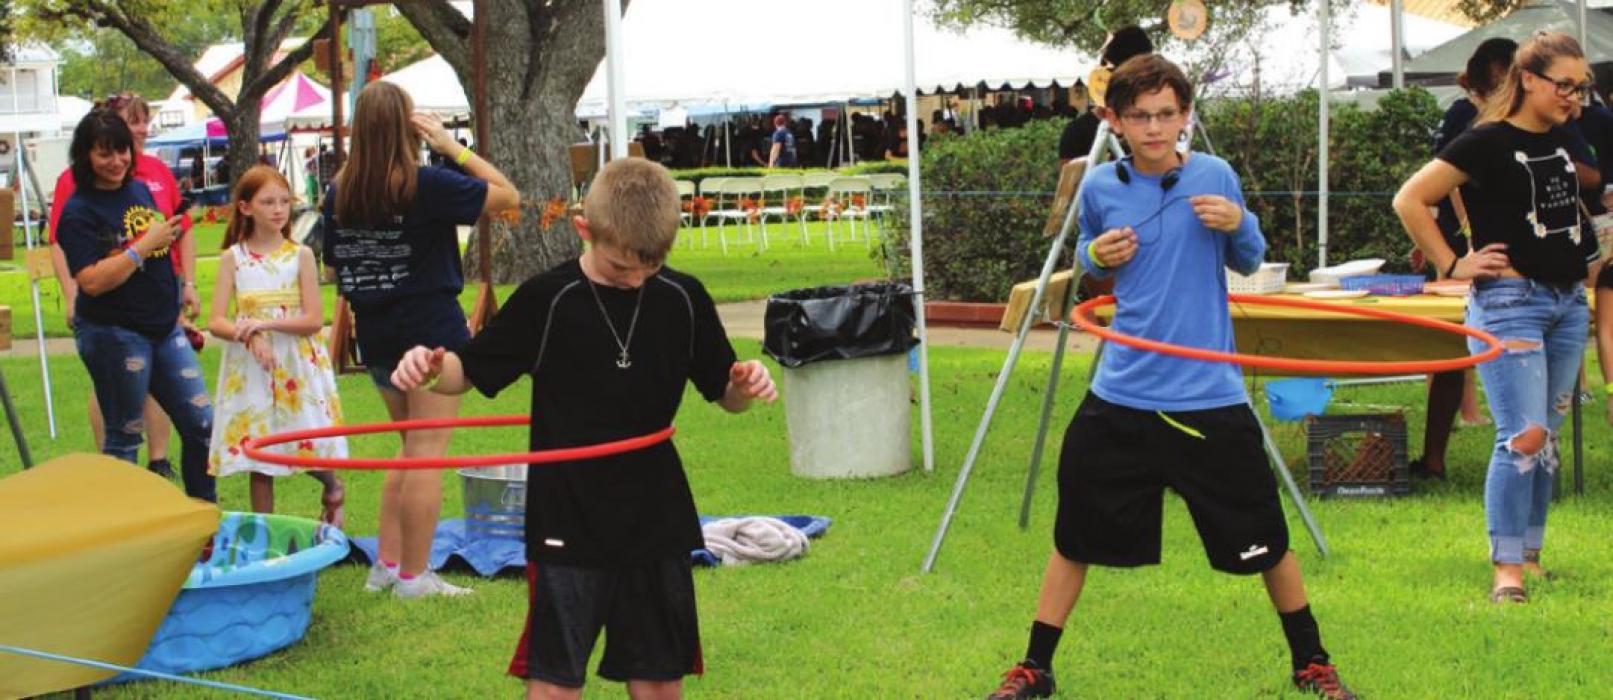 Children’s activities will be provided on the courthouse lawn during Oktoberfest. Images from the 2019 Oktoberfest